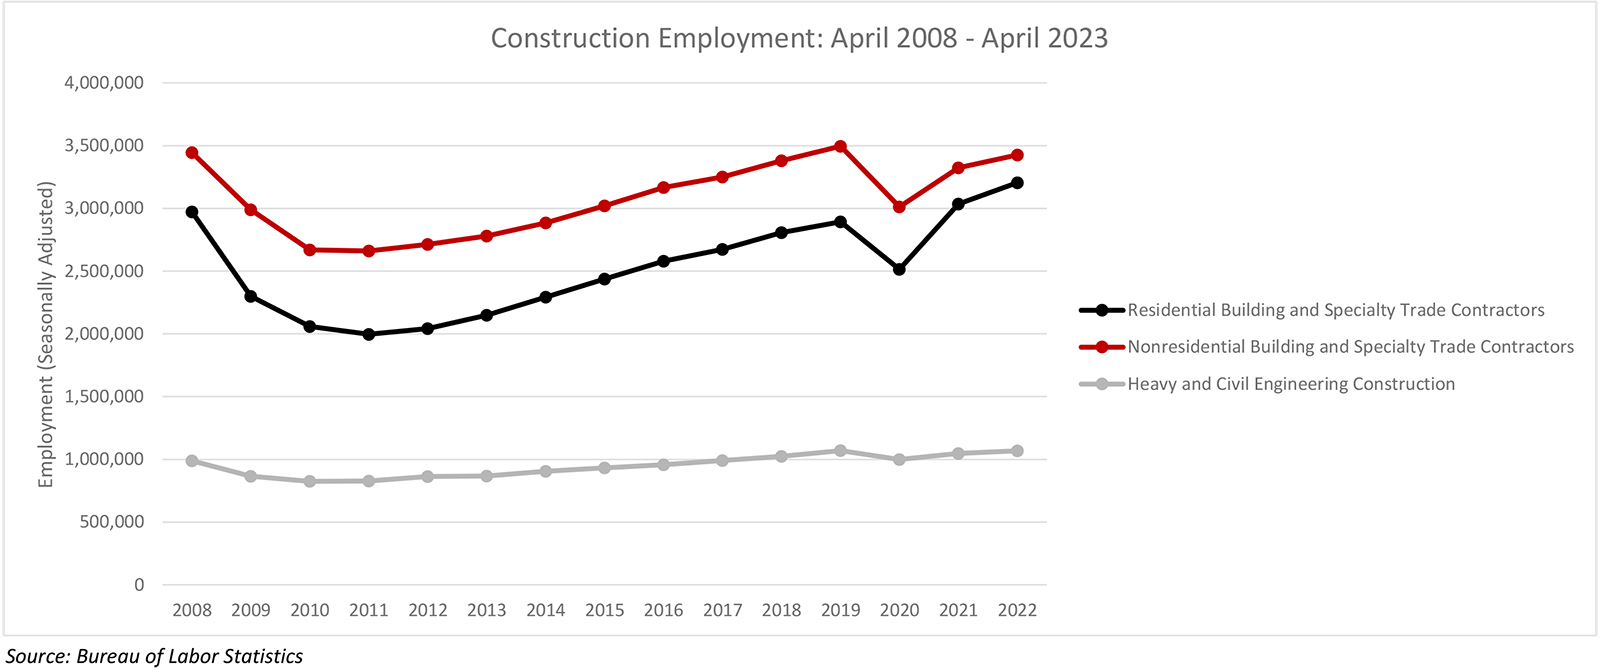 Nonresidential Construction Employment Increased in April